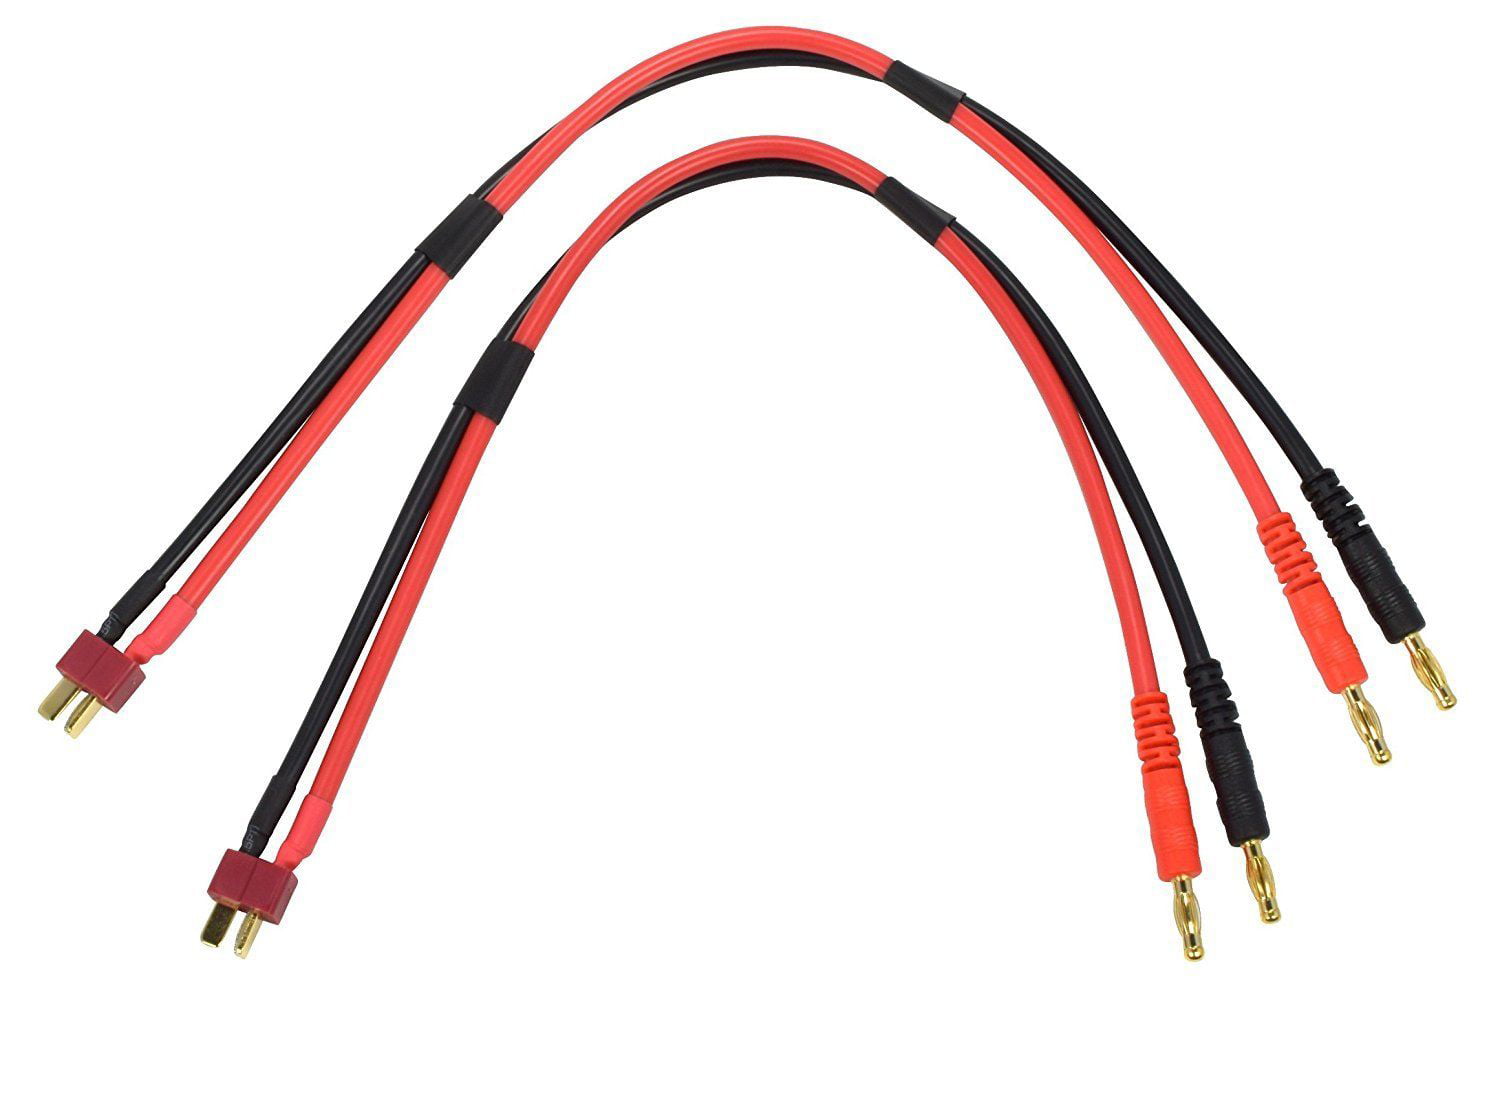 Deans Ultra Charge Cable Deans Male 4mm Banana Plug Lipo Nylon T-Connector Cable 